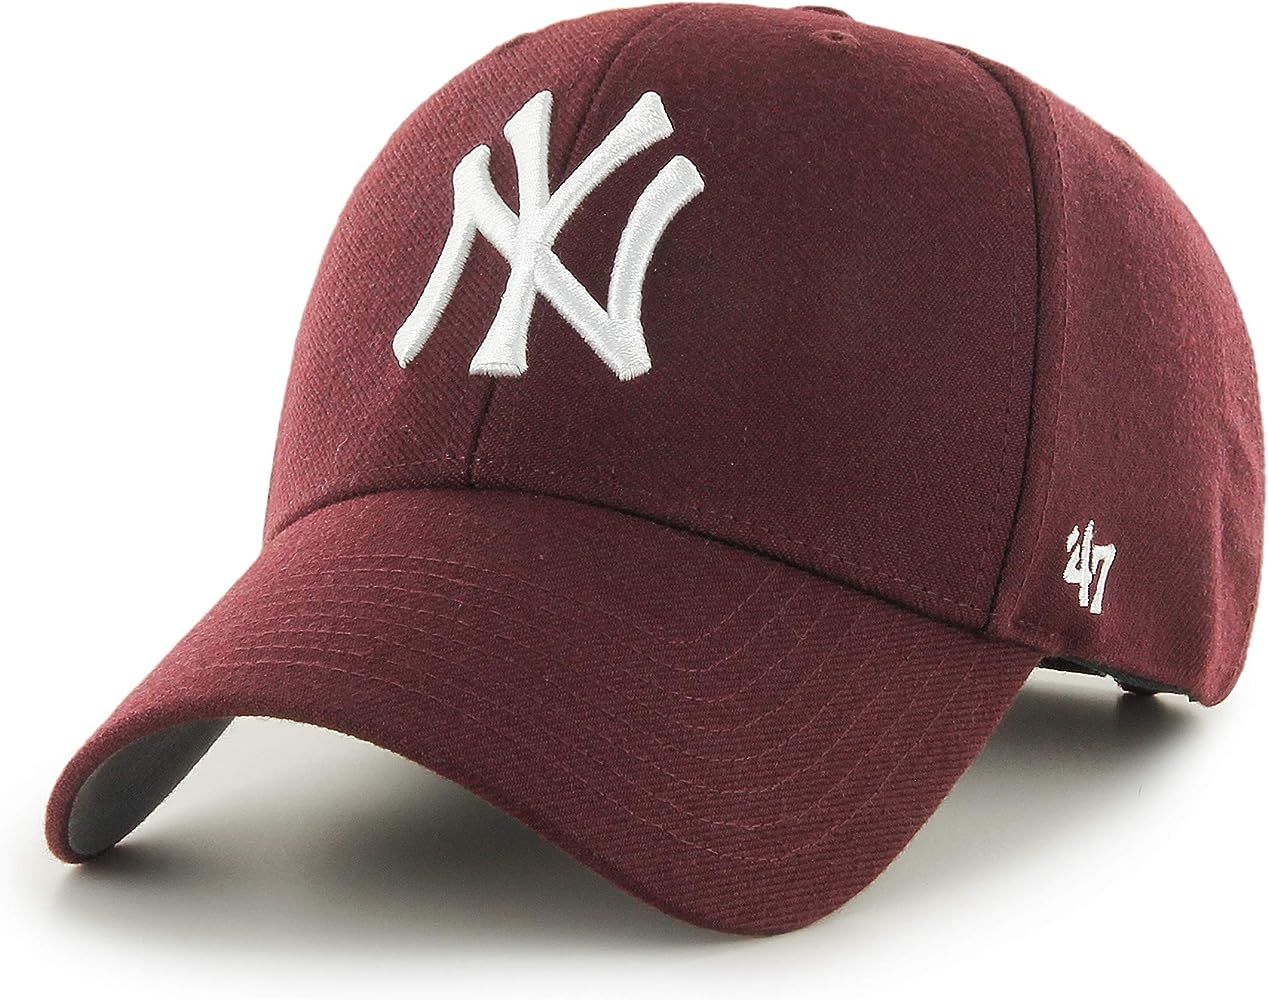 '47 MLB Mens Men's Brand Clean Up Cap One-Size | Amazon (US)